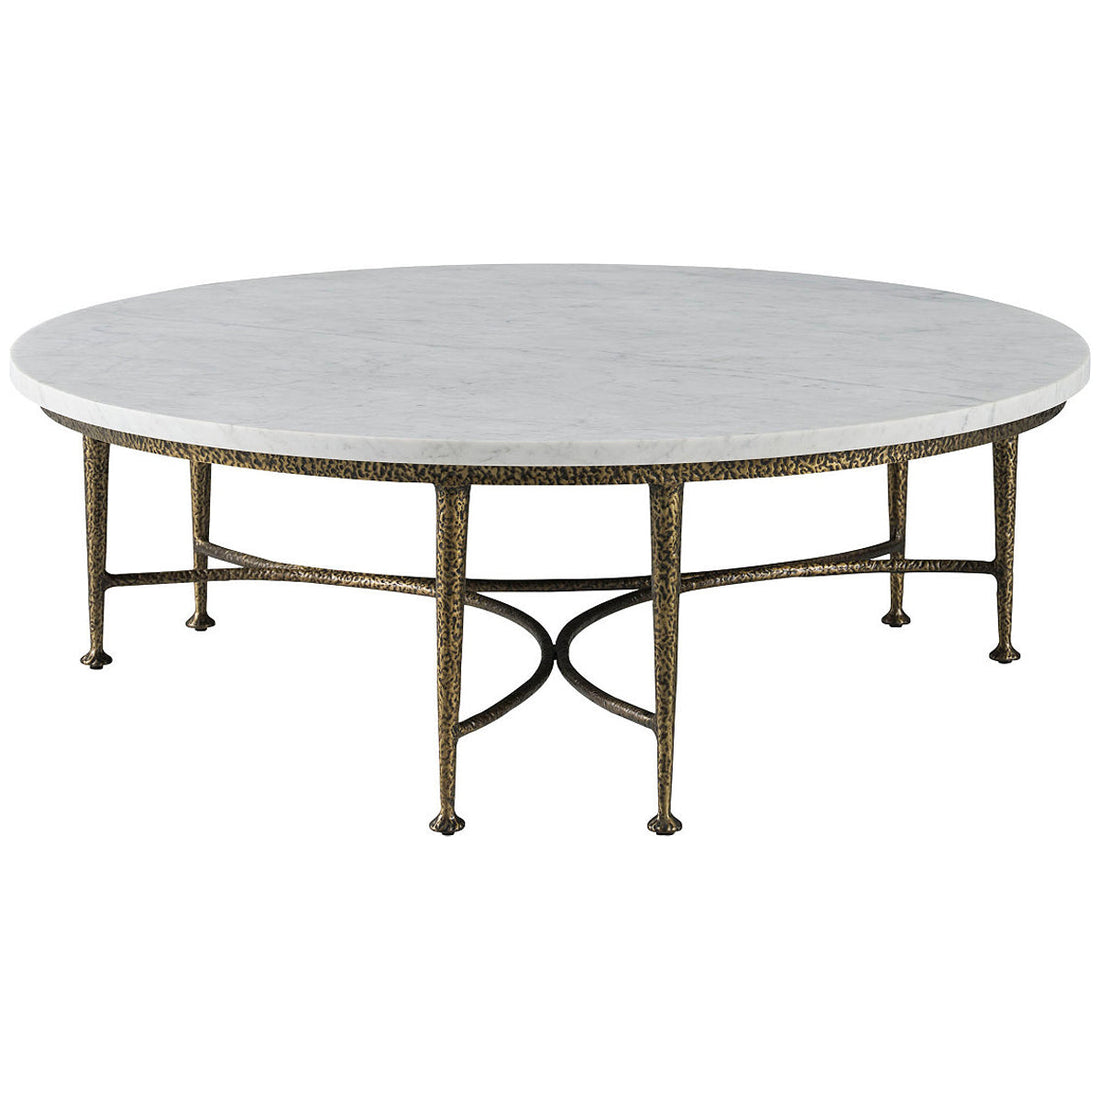 Baker Furniture Classico Cocktail Table BAA3450